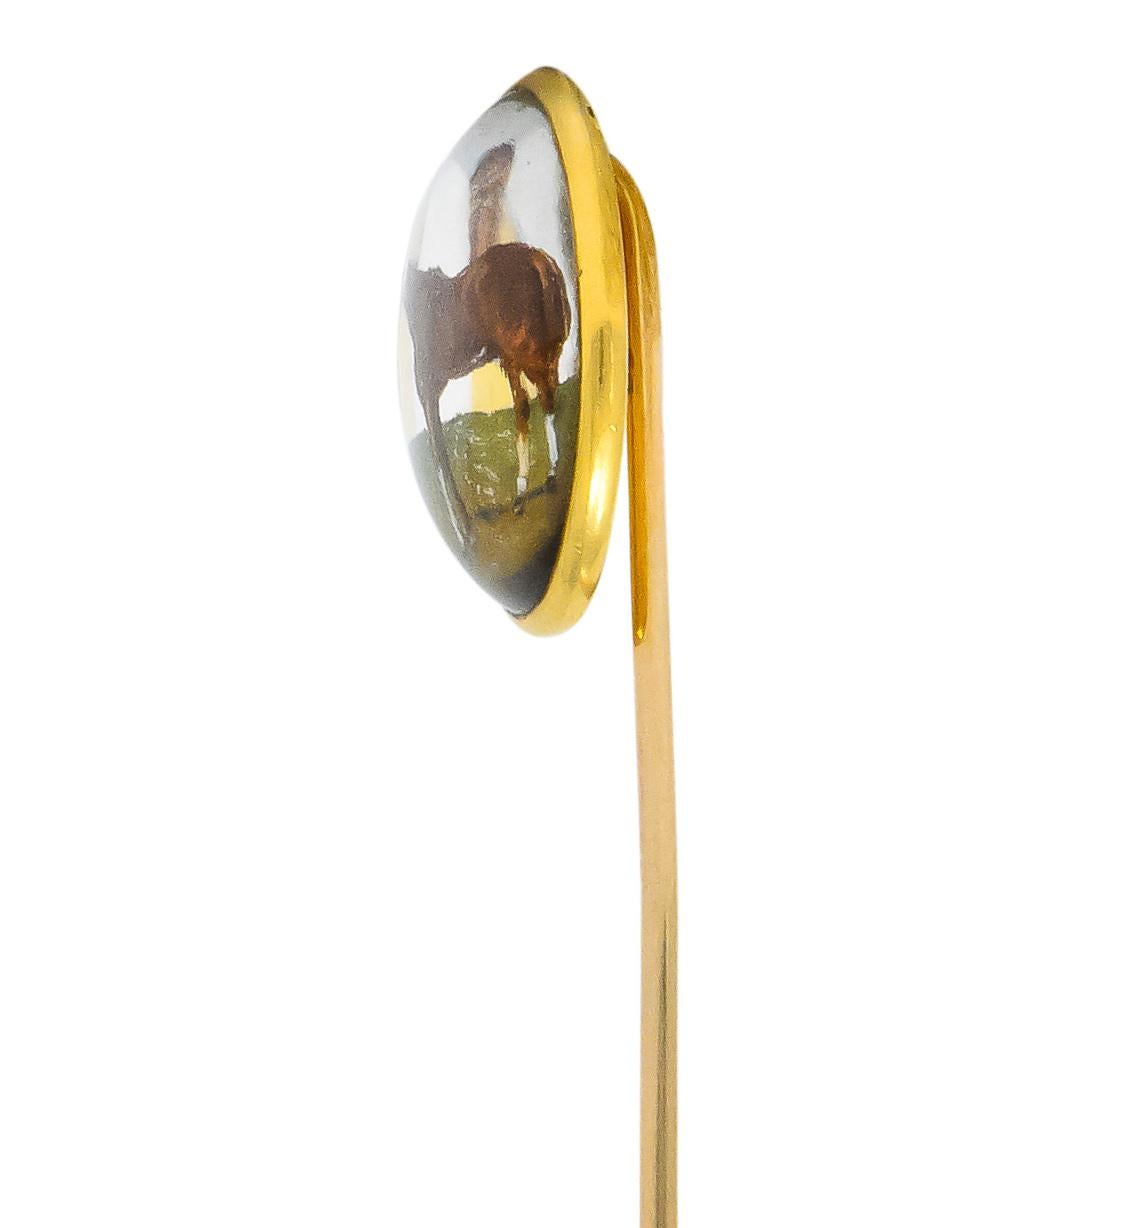 Centering a transparent rock crystal measuring approximately 18.5 mm, bezel set, in a high polished gold surround

Reverse painted depiction of a horse, hand-painted chestnut brown and standing in a lush yellow to green pasture

Fully signed Tiffany